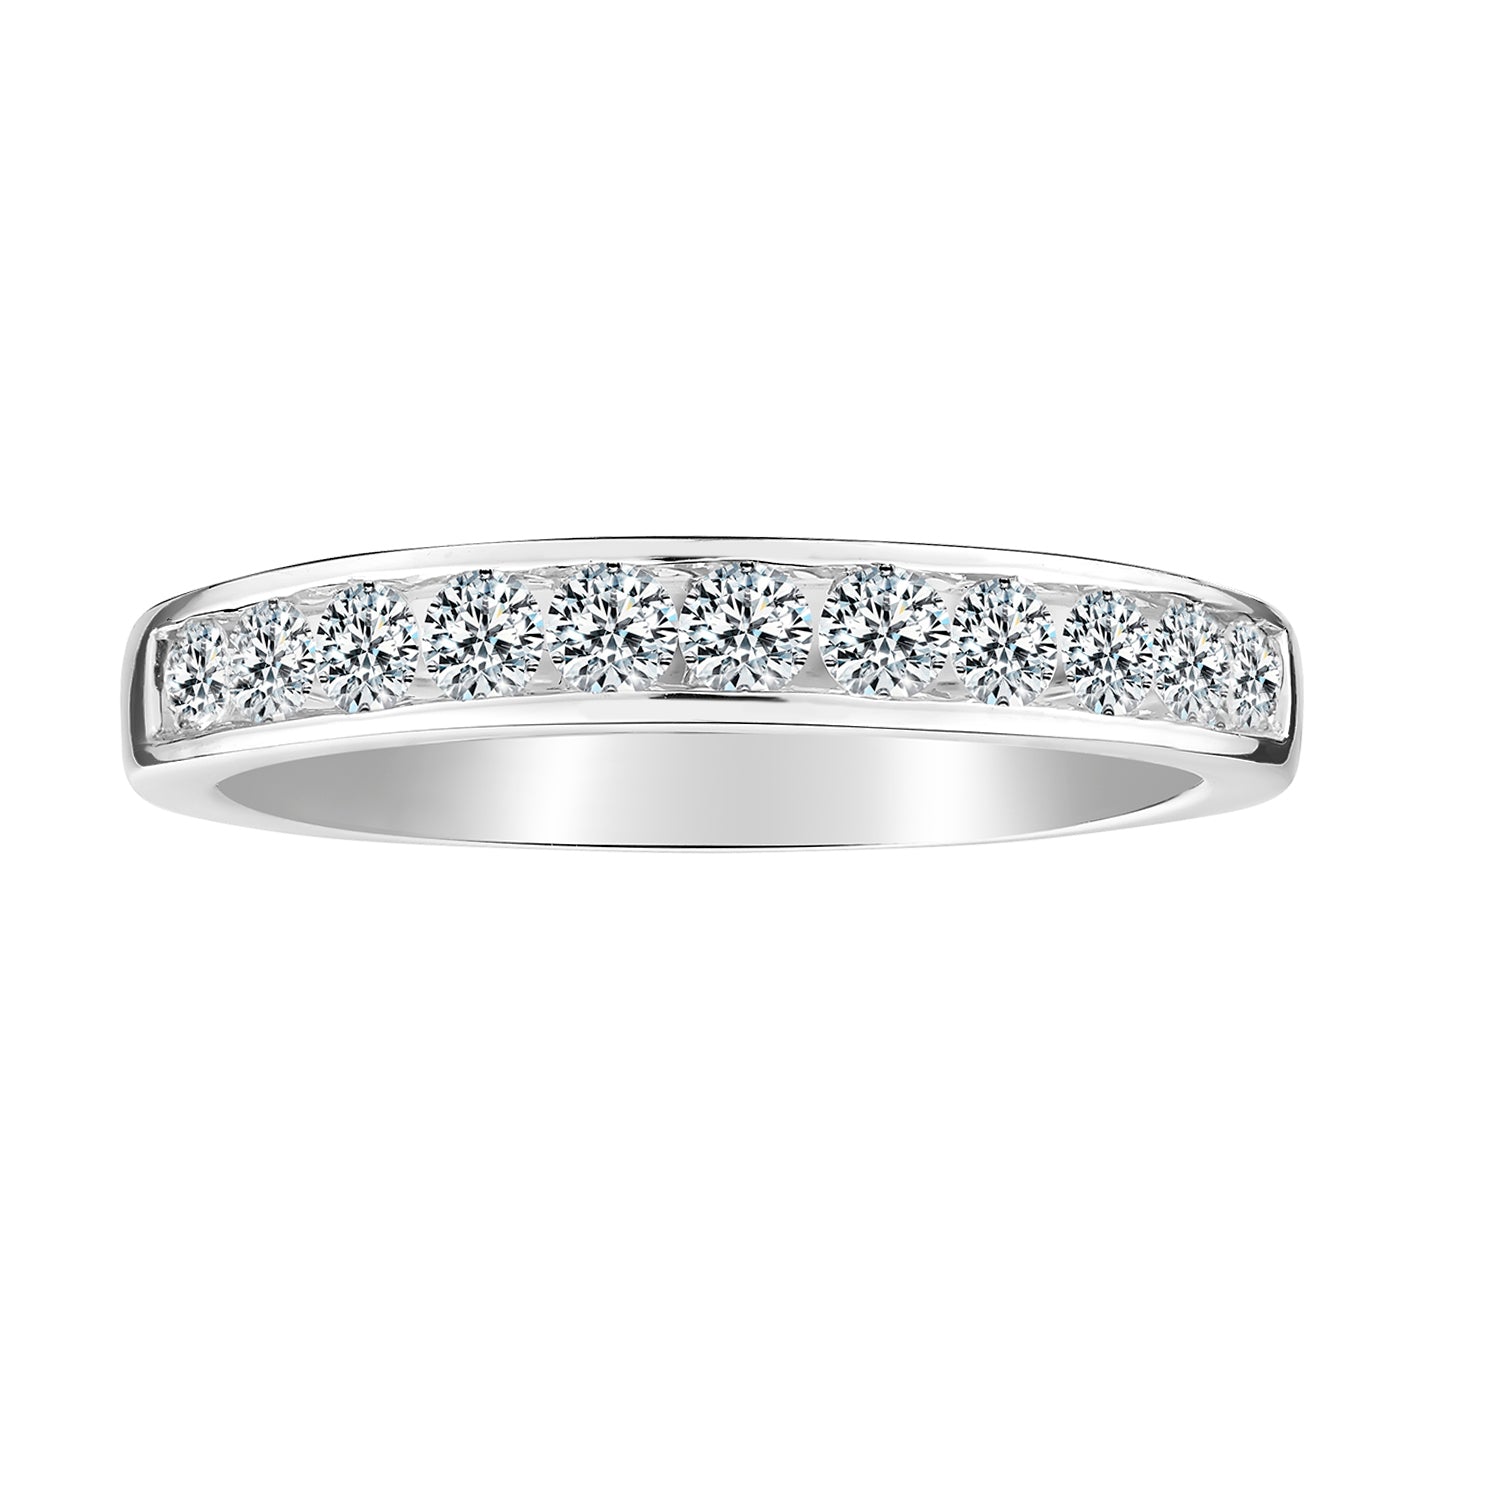 .50 Carat of Lab Grown Diamonds Band, 10kt White Gold.......................NOW